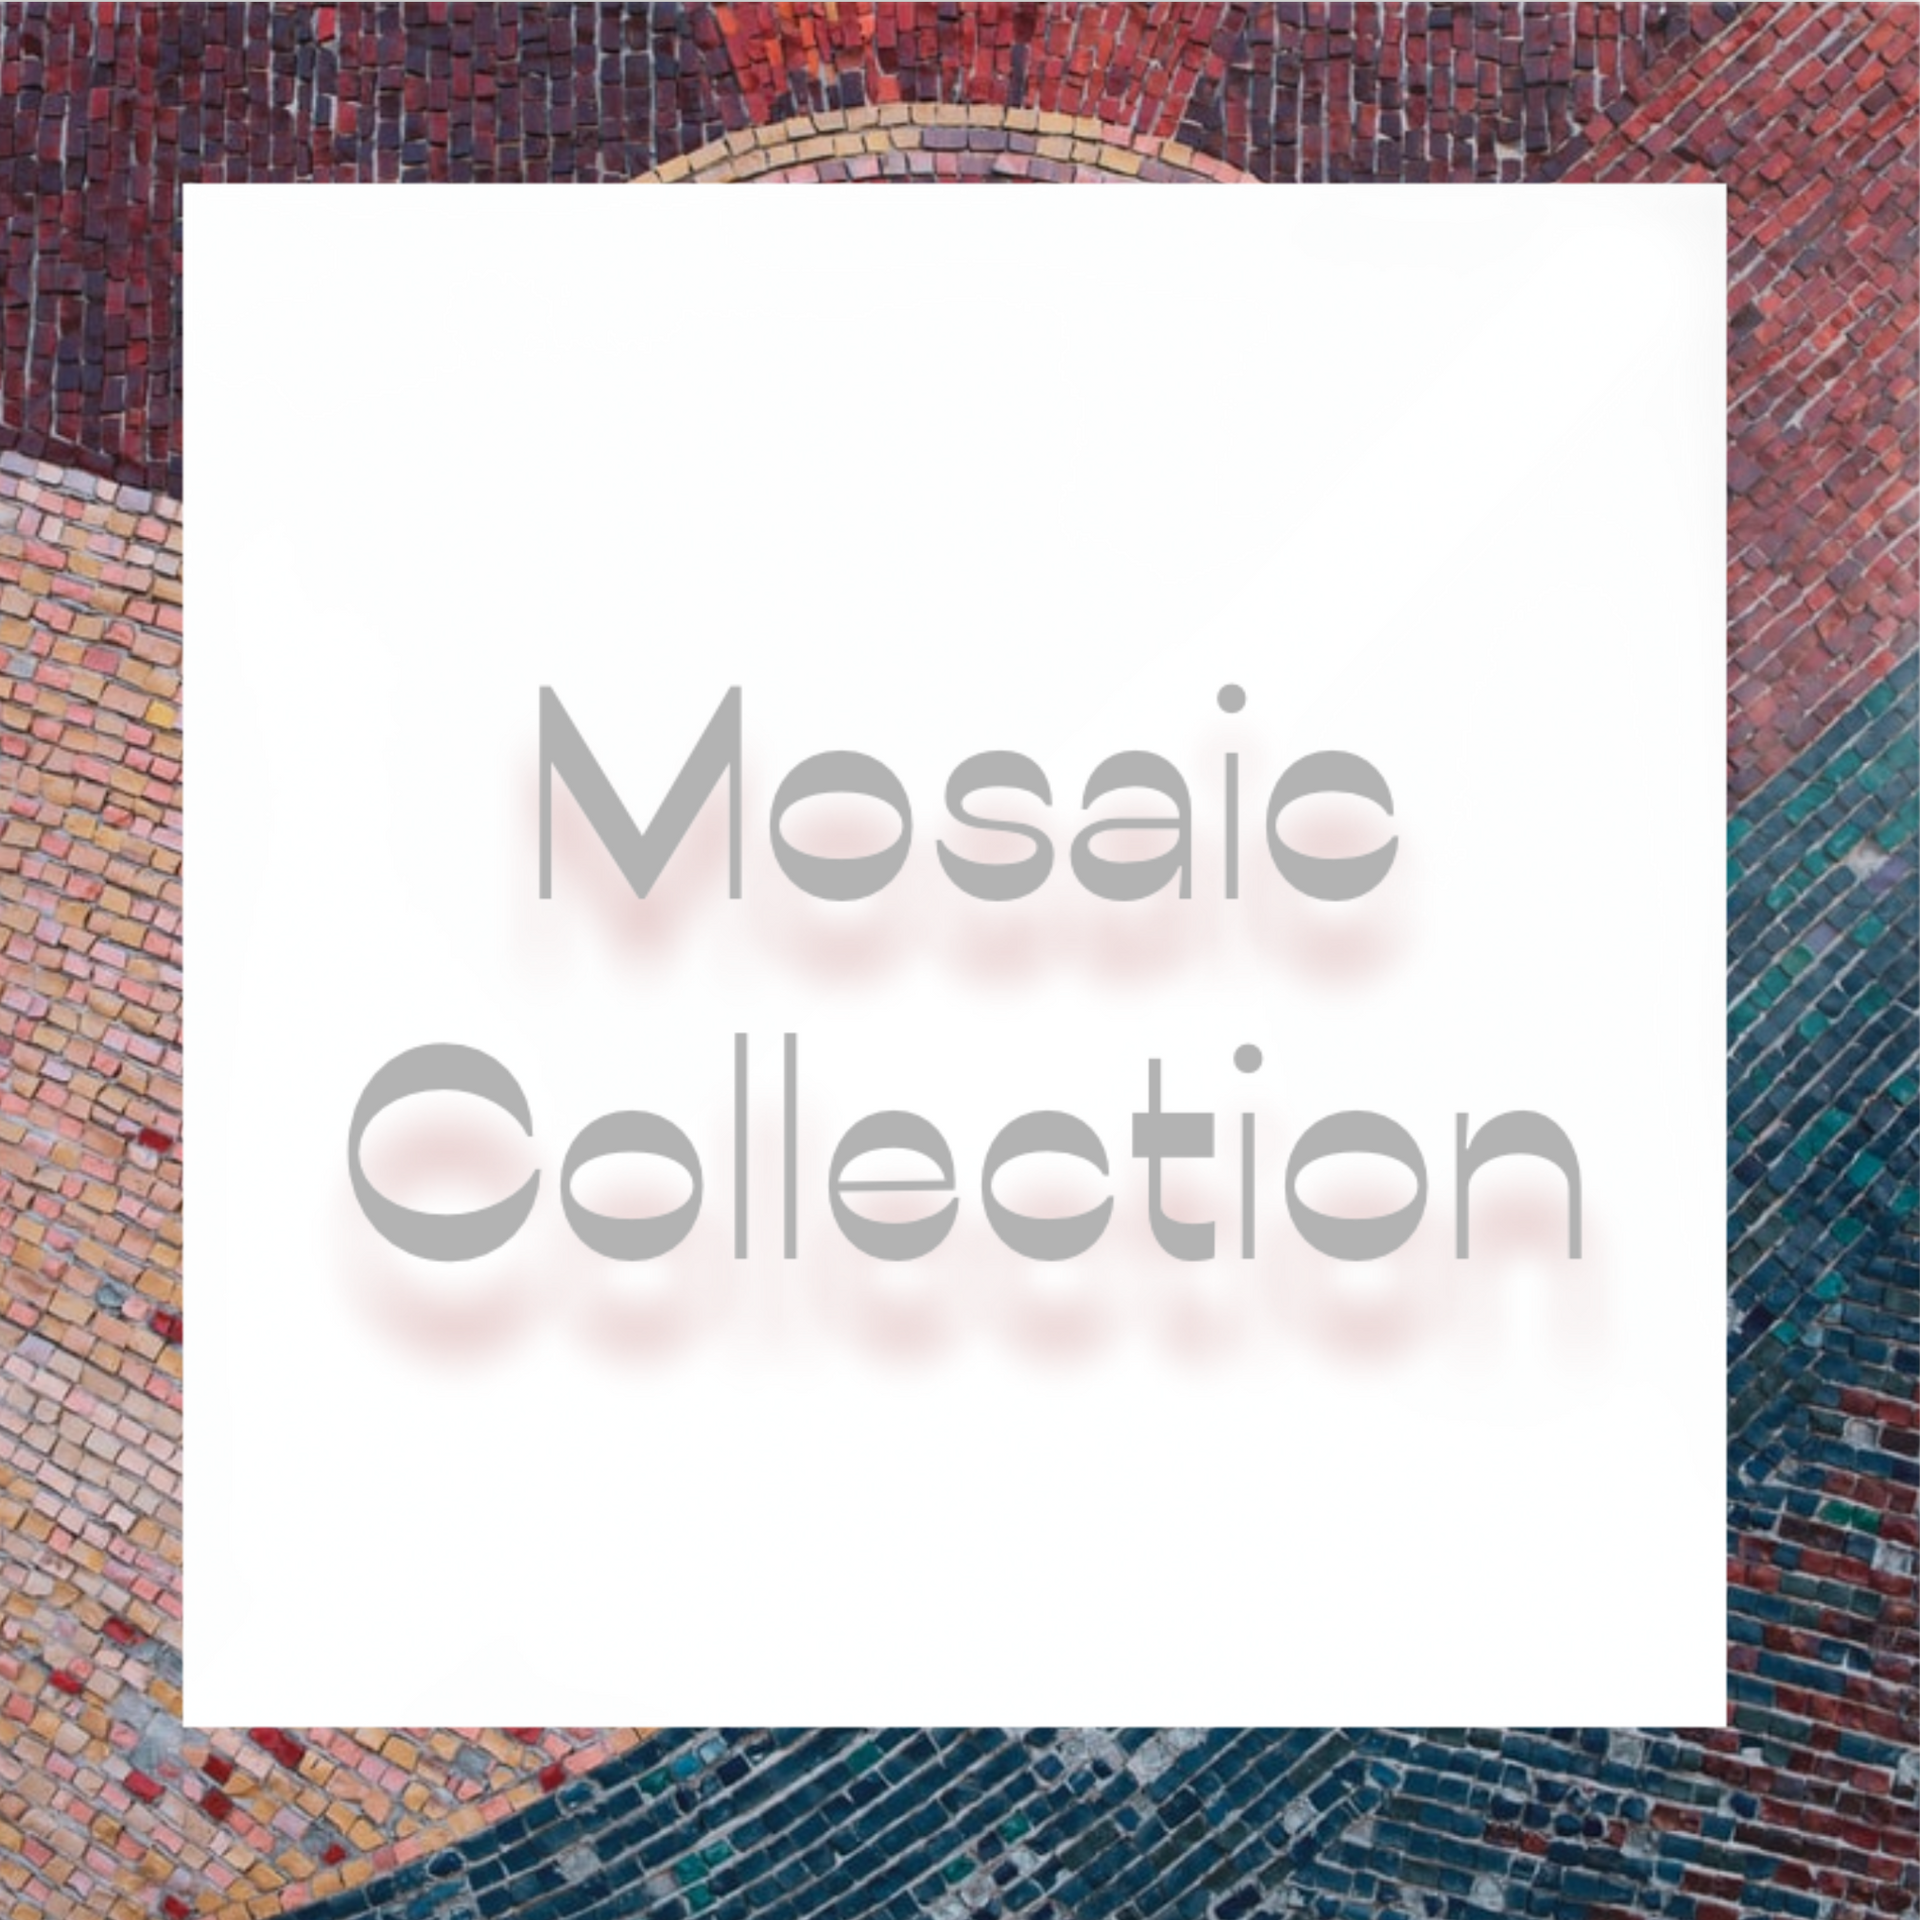 Mosaic Collection Treasures of Brazil